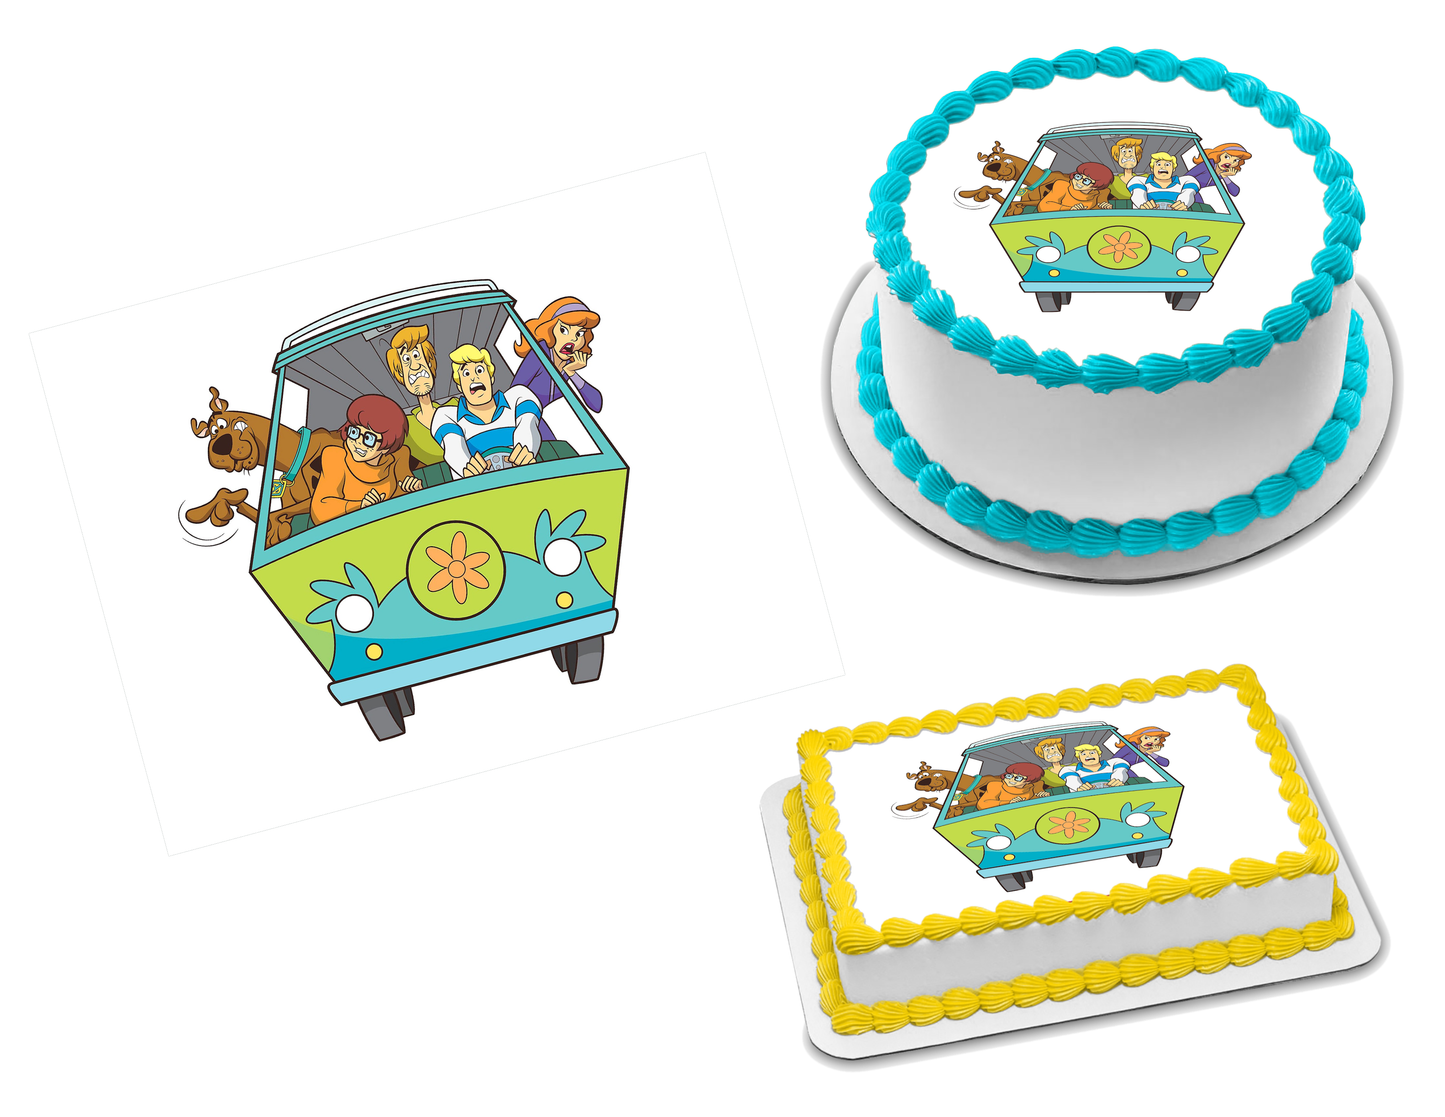 Scooby Doo Edible Image Frosting Sheet #21 (70+ sizes)